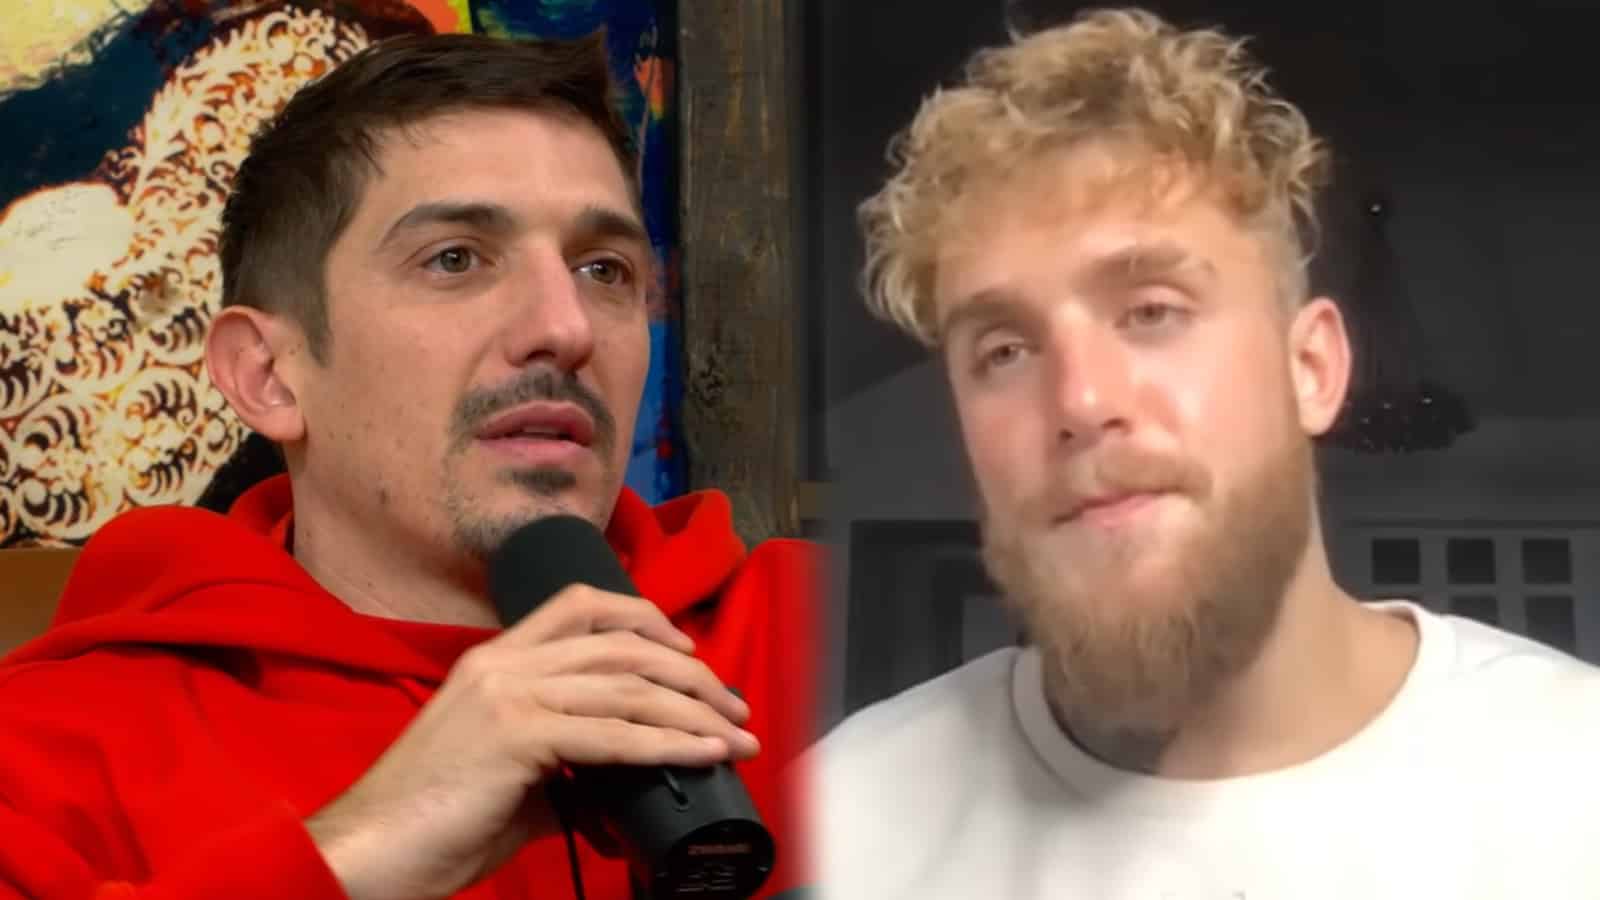 Comedian Andrew Schulz next to YouTuber Jake Paul